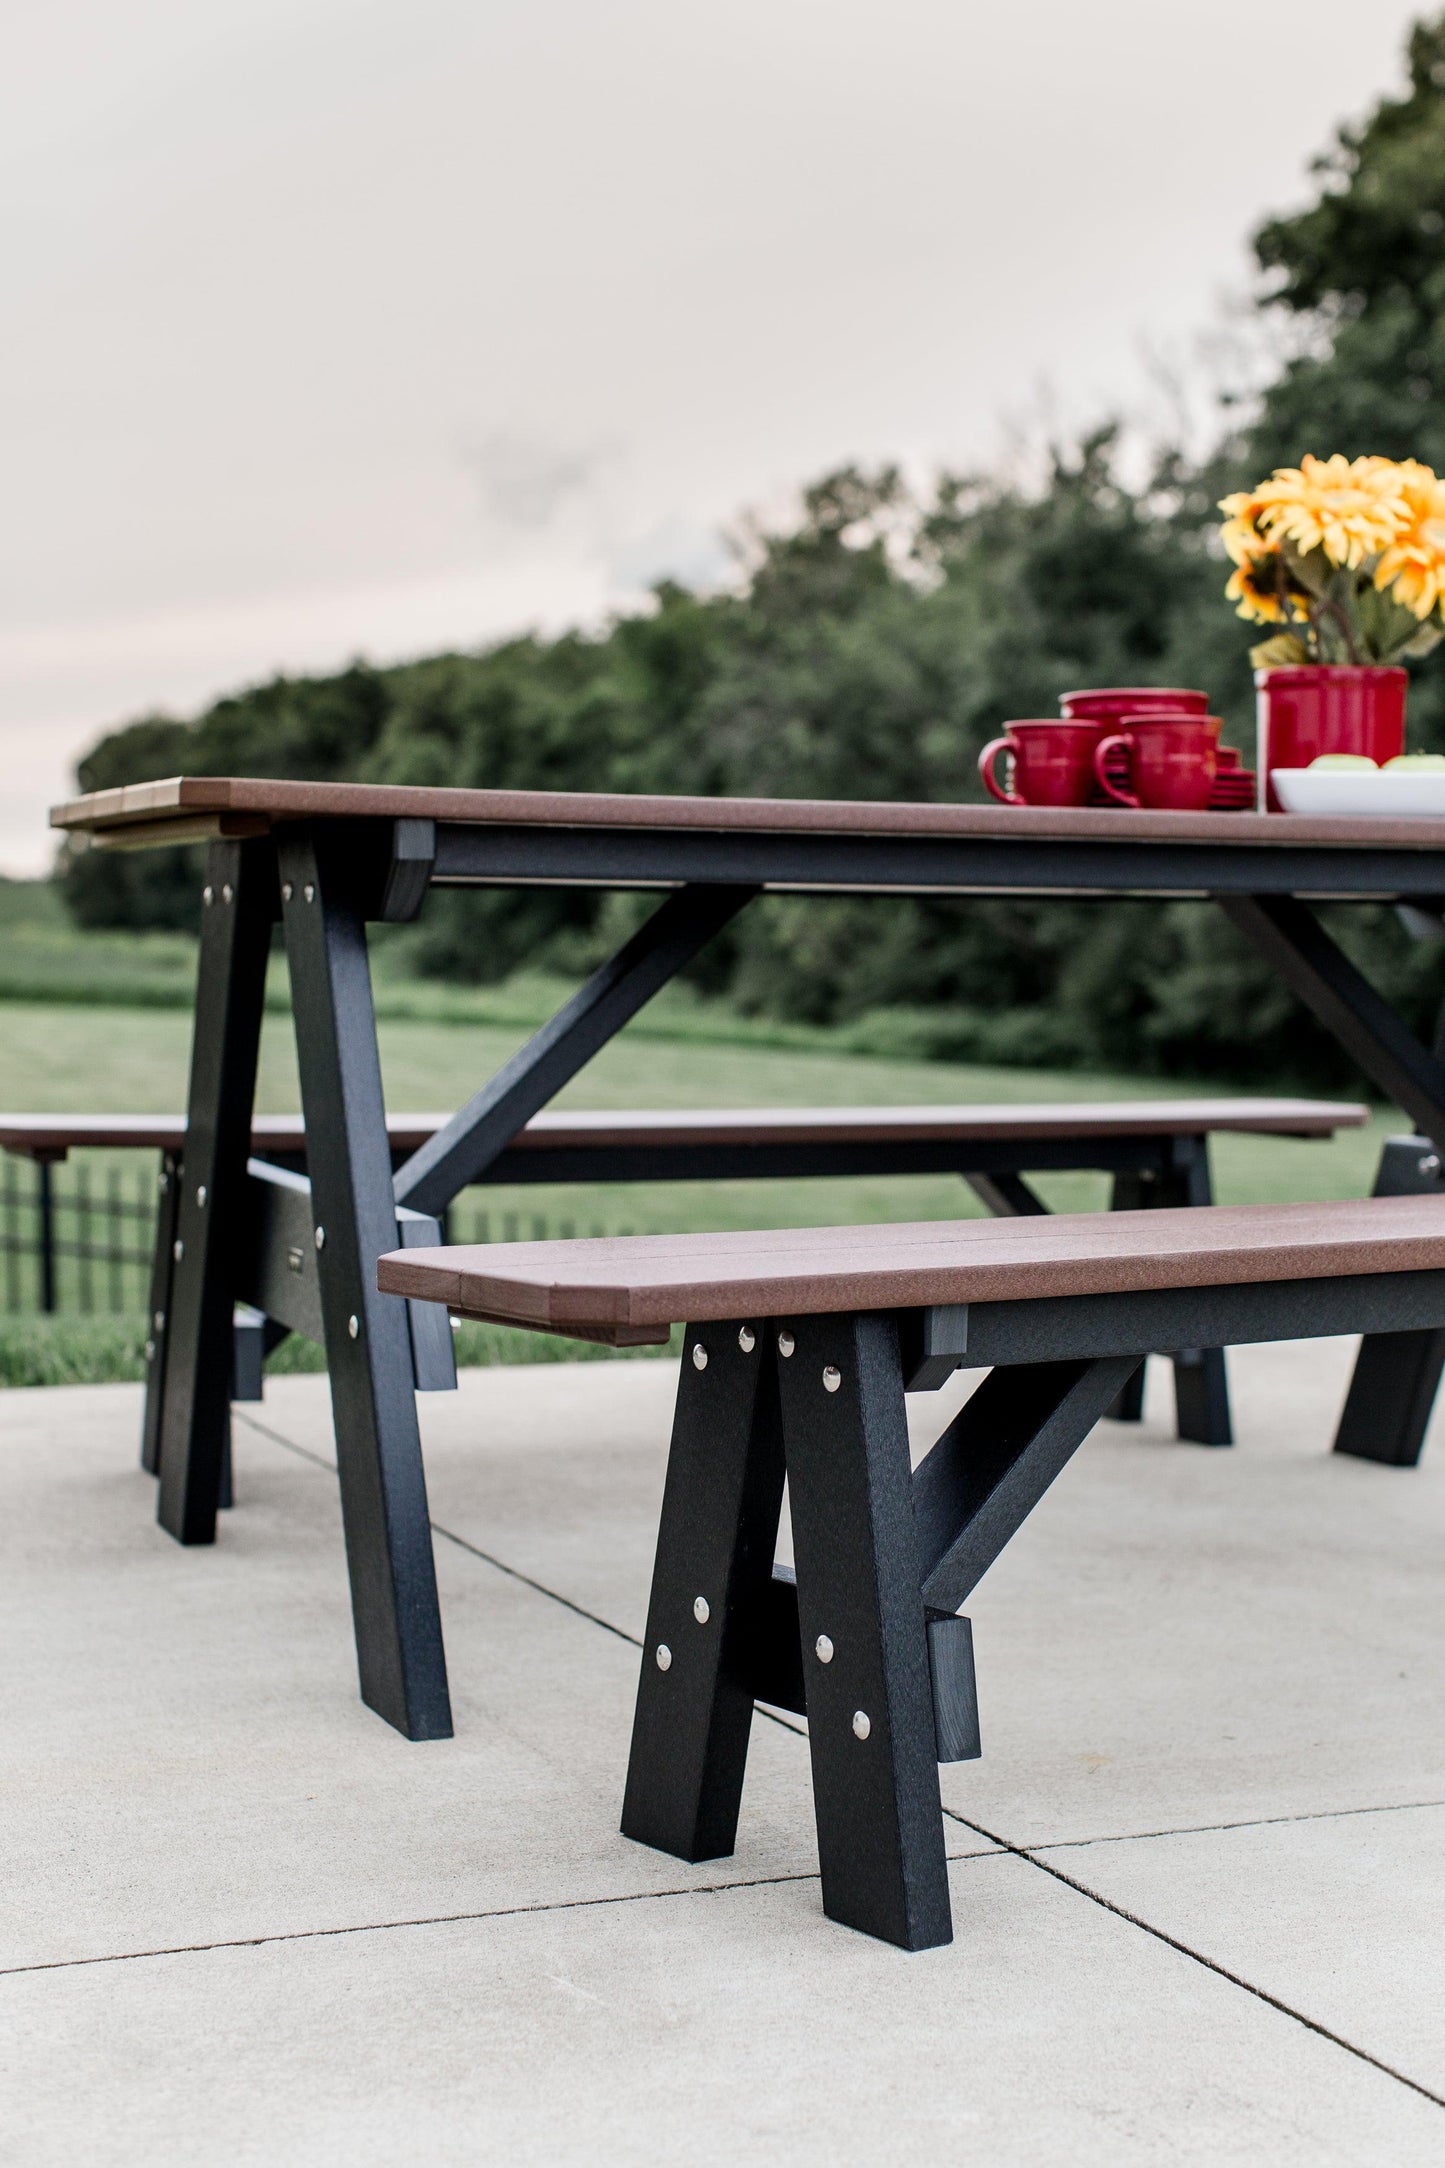 Wildridge Heritage Recycled Plastic Picnic Table with Unattached Benches - LEAD TIME TO SHIP 6 WEEKS OR LESS